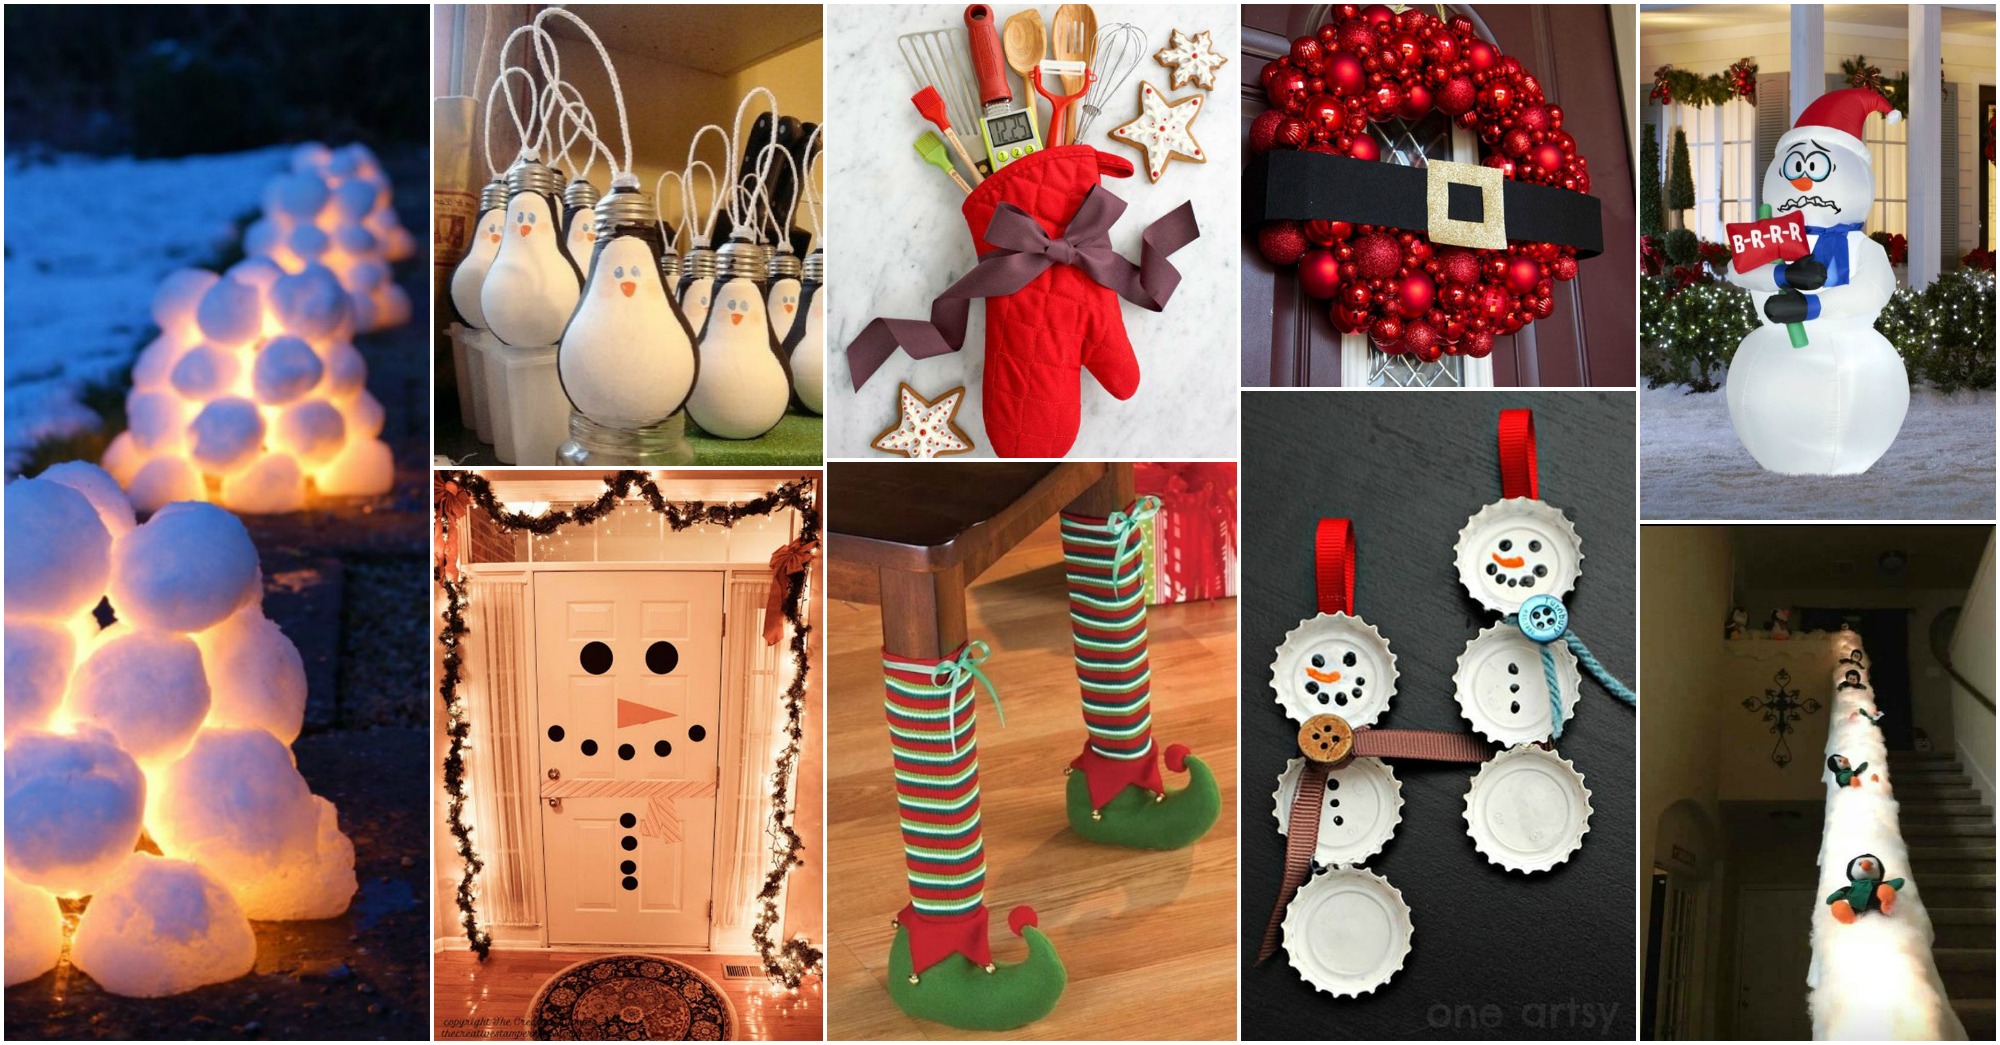 Diy Funny Christmas Decor Ideas That Will Make You Cheerful for Christmas Home Decorations To Make